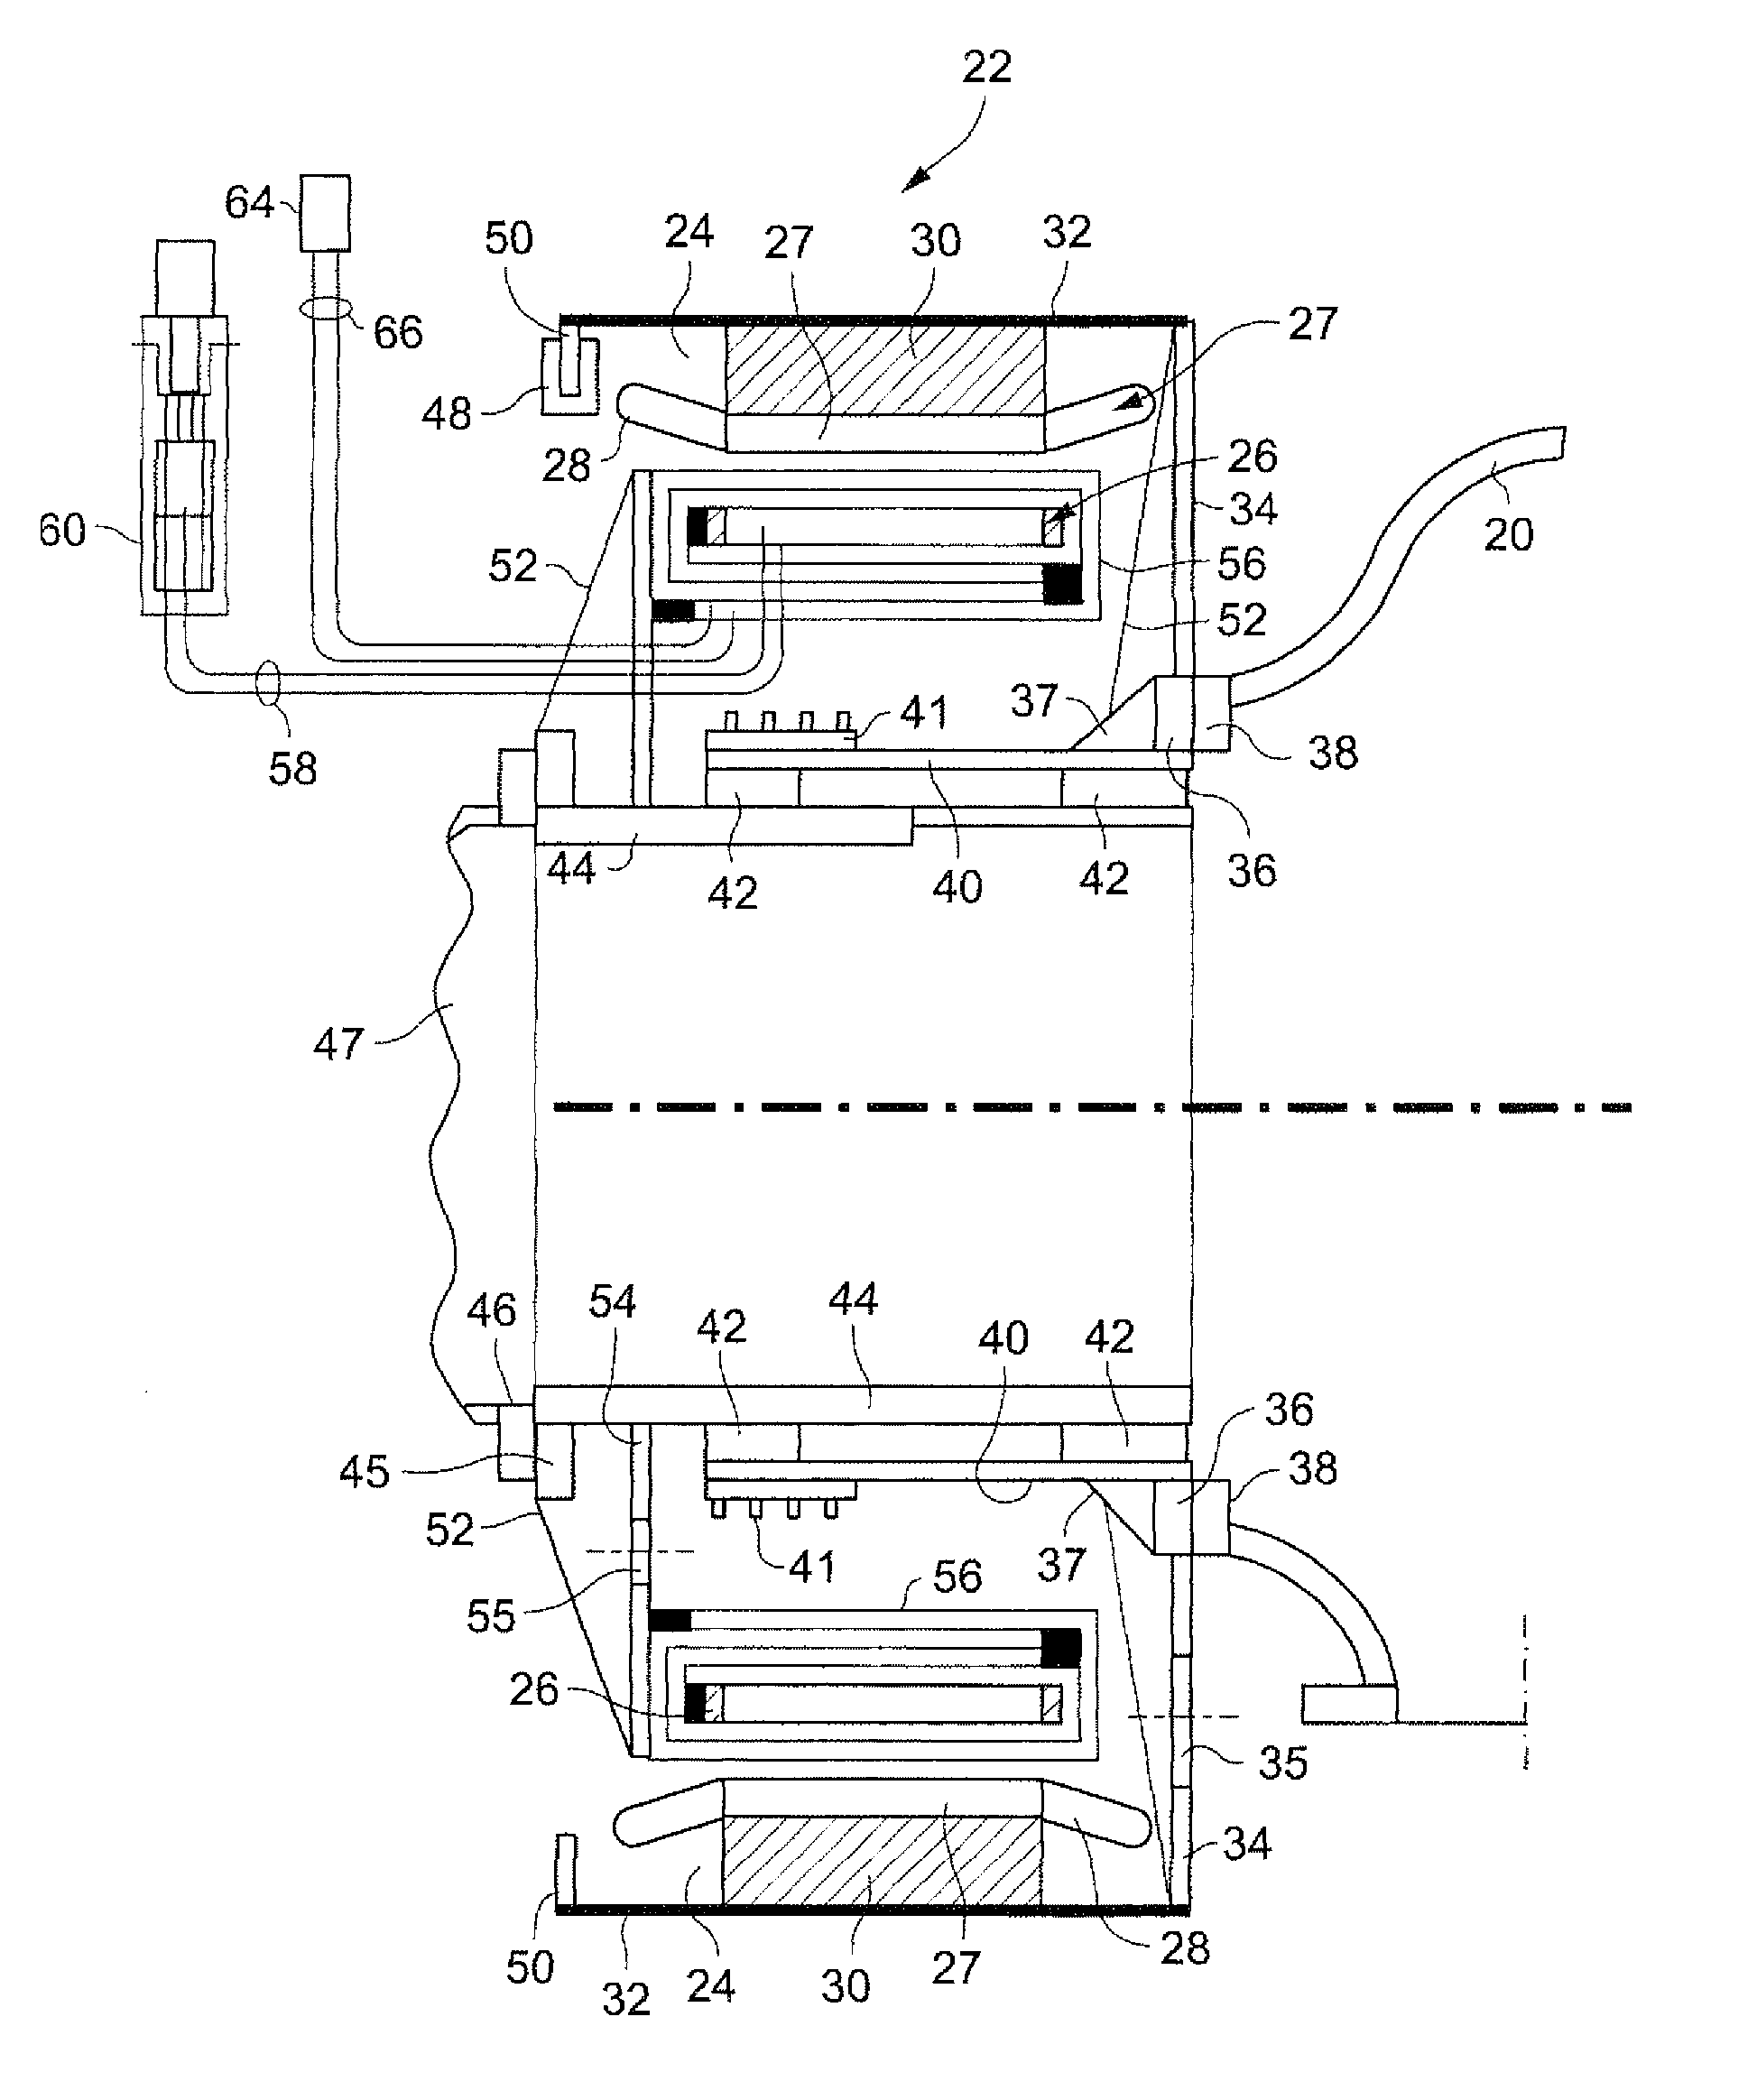 Method and apparatus for a superconducting generator driven by wind turbine